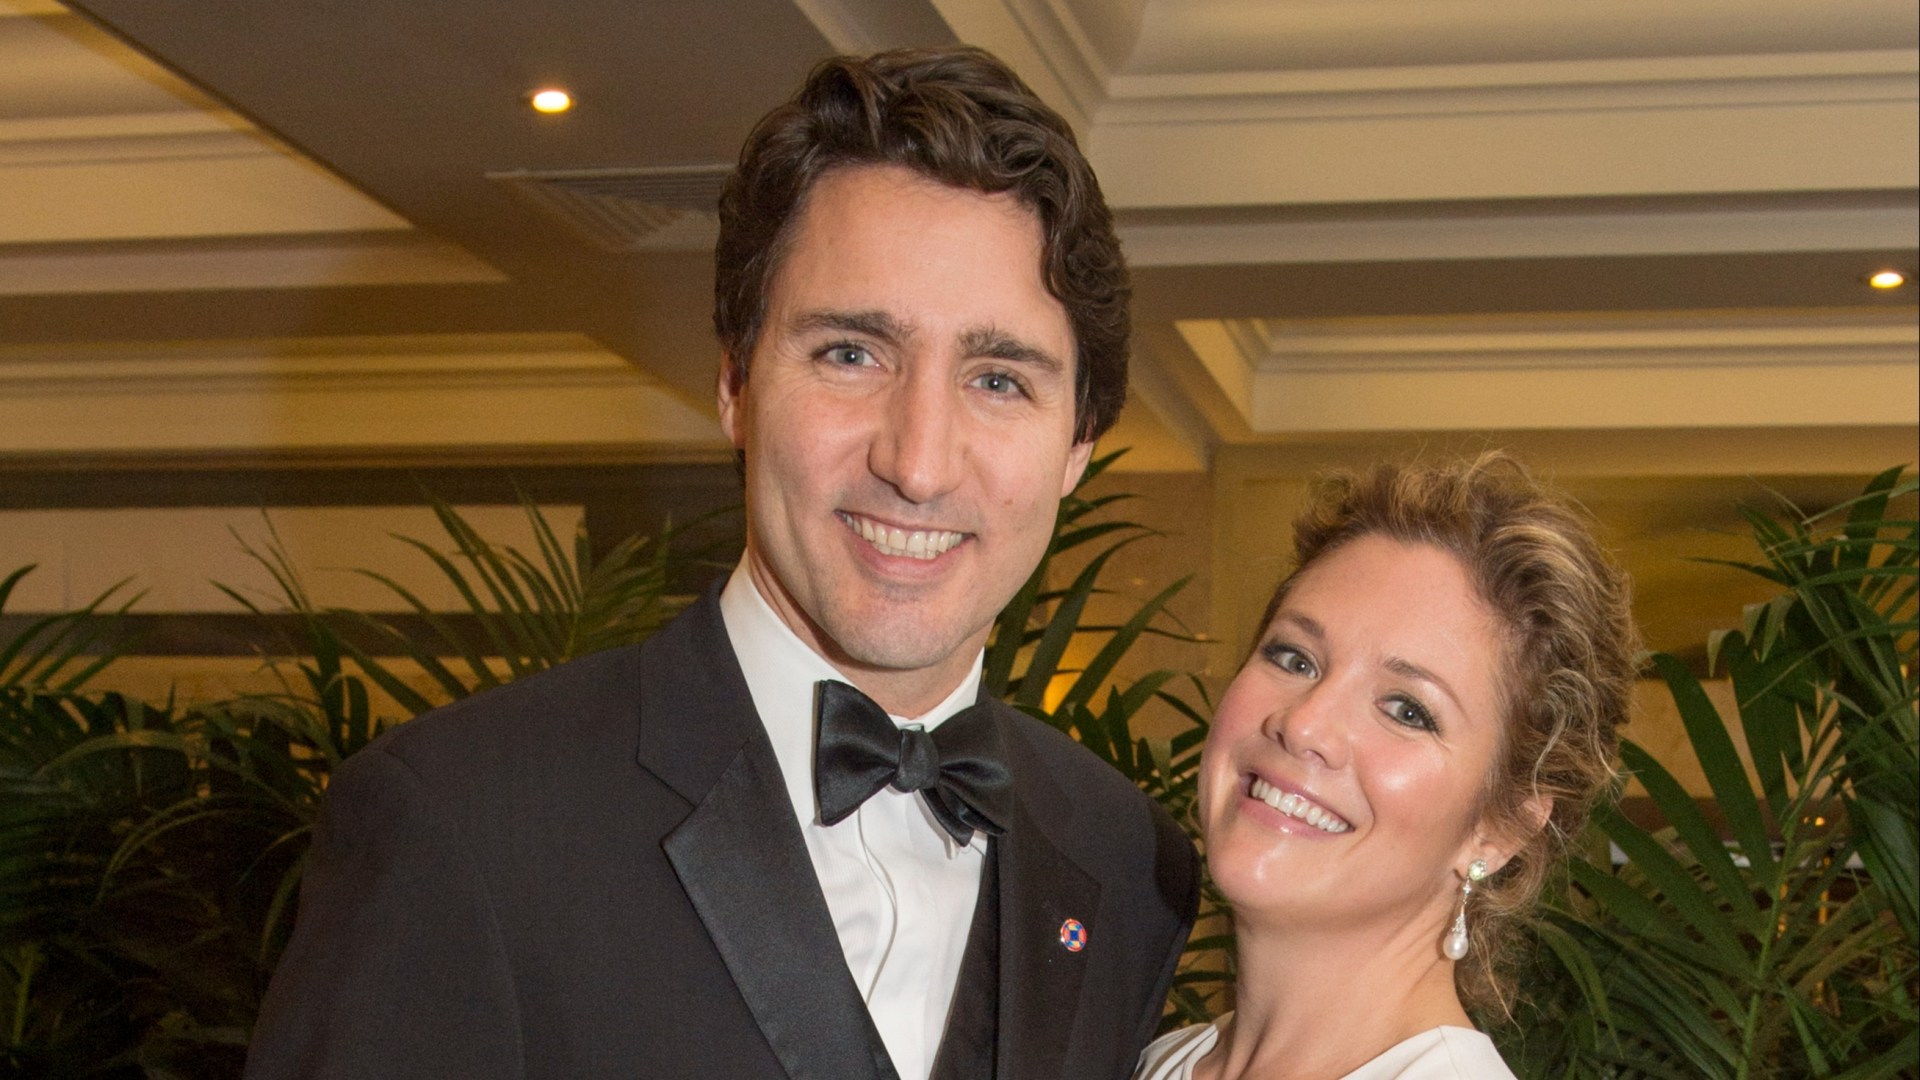 Sophie Trudeau claims she ‘hasn’t spent much time’ with Meghan Markle despite Duchess saying she is a ‘dear friend’ [Video]